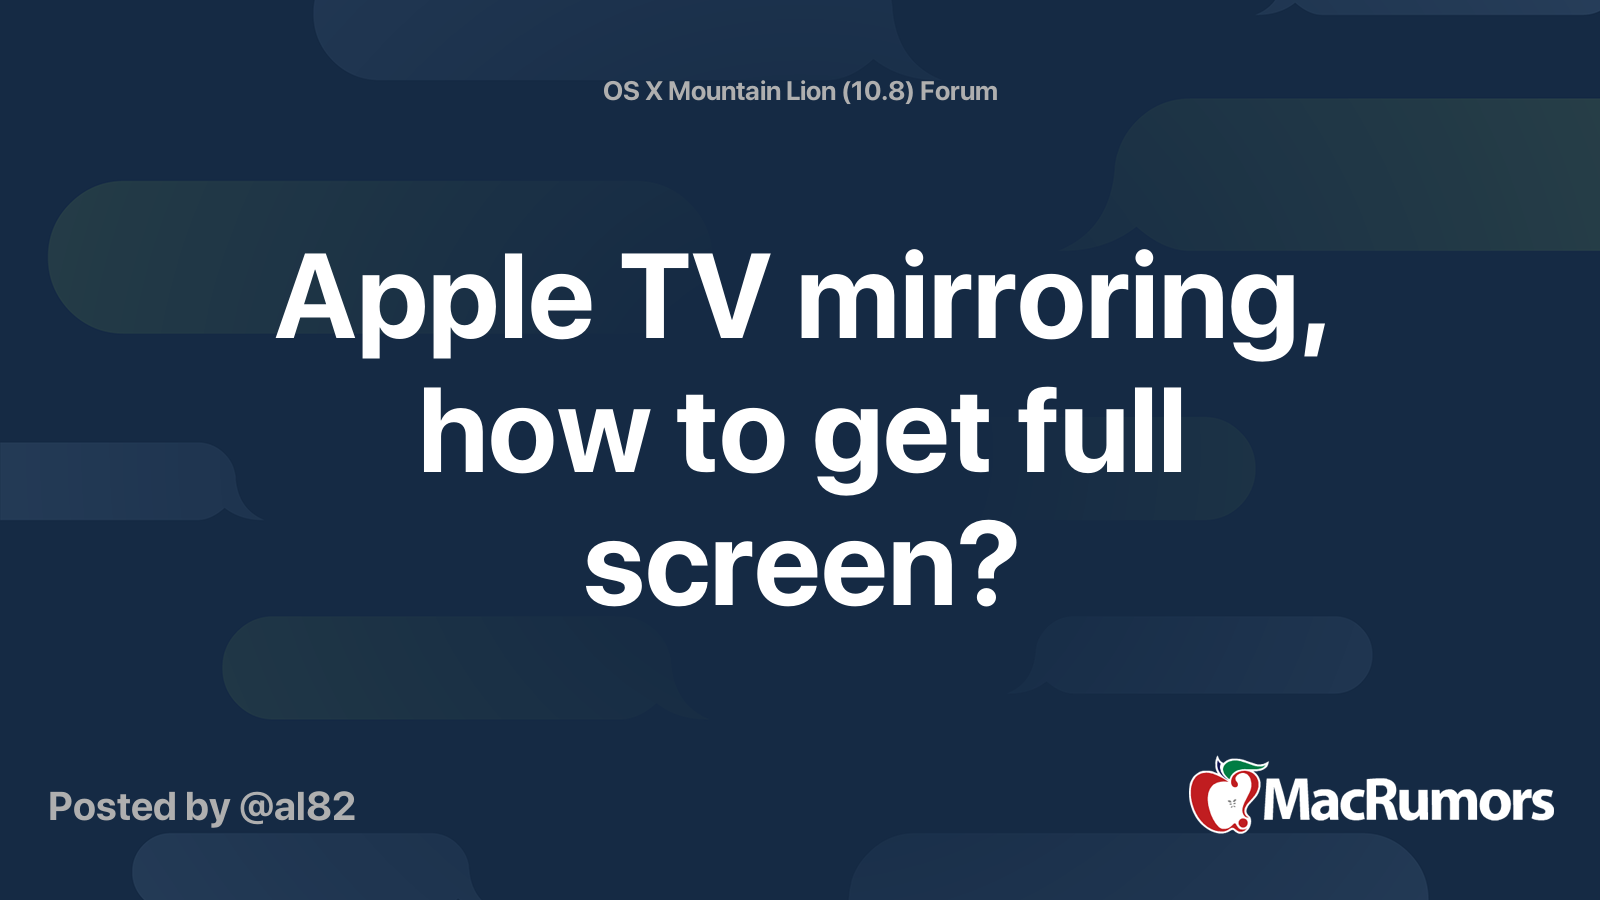 Apple Tv Mirroring How To Get Full, How To Full Screen Mirroring Apple Tv